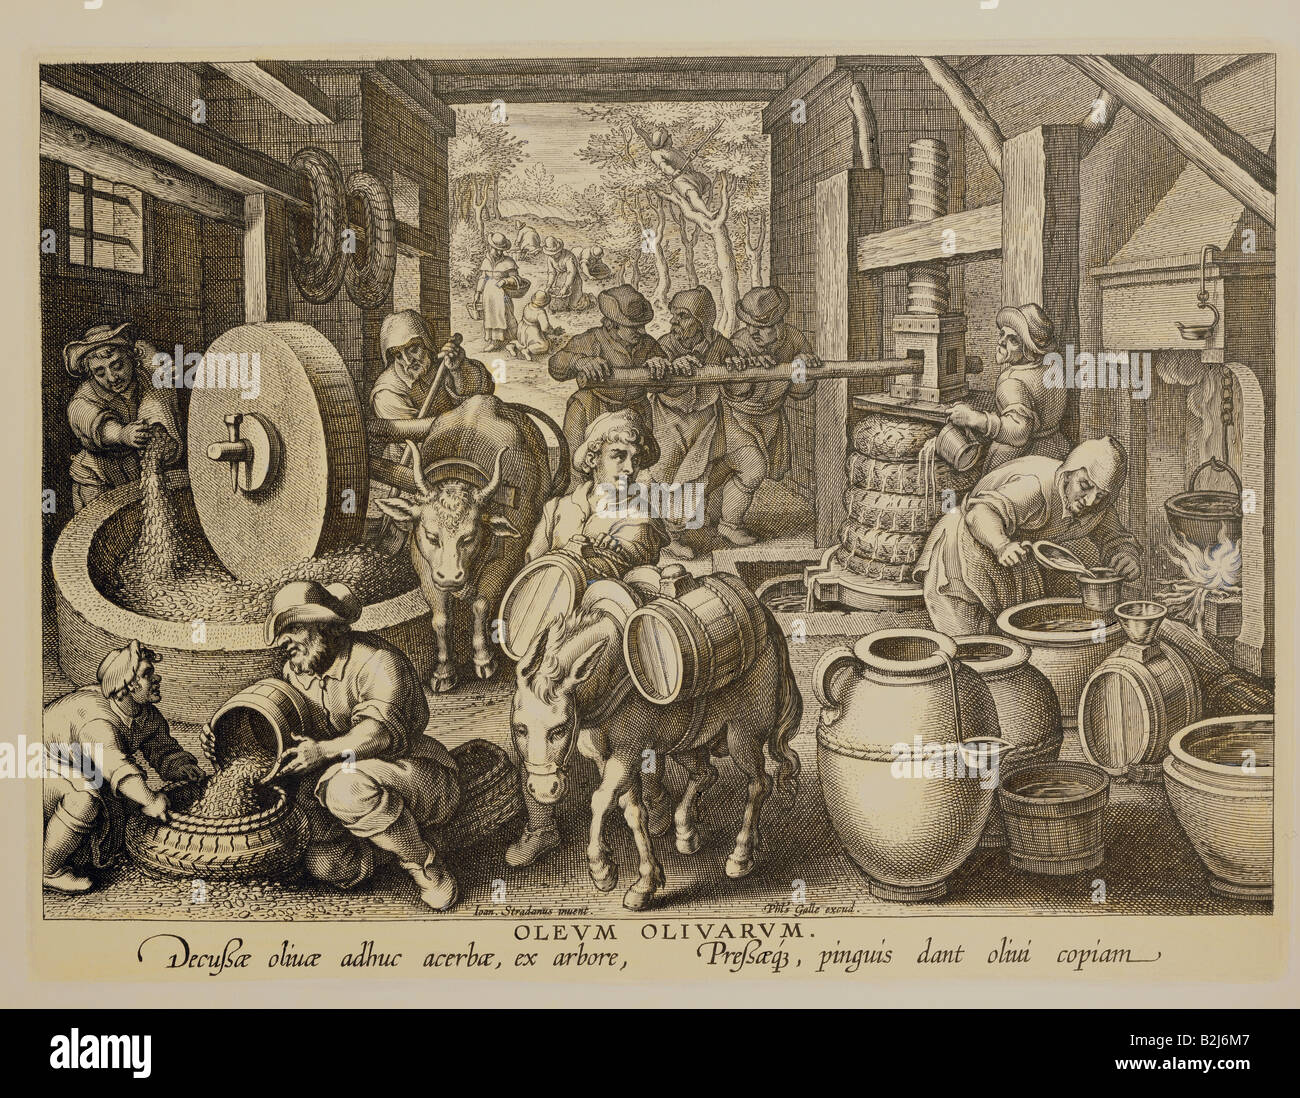 food, production, 'Oleum Olivarum' (Olive Oil), copper engraving, by Theodor Galle or Jan Collaert, based on Johannes Stradanus (1523-1605), from 'Nova Reperta' (New inventions), circa 1580, private collection, Artist's Copyright has not to be cleared Stock Photo